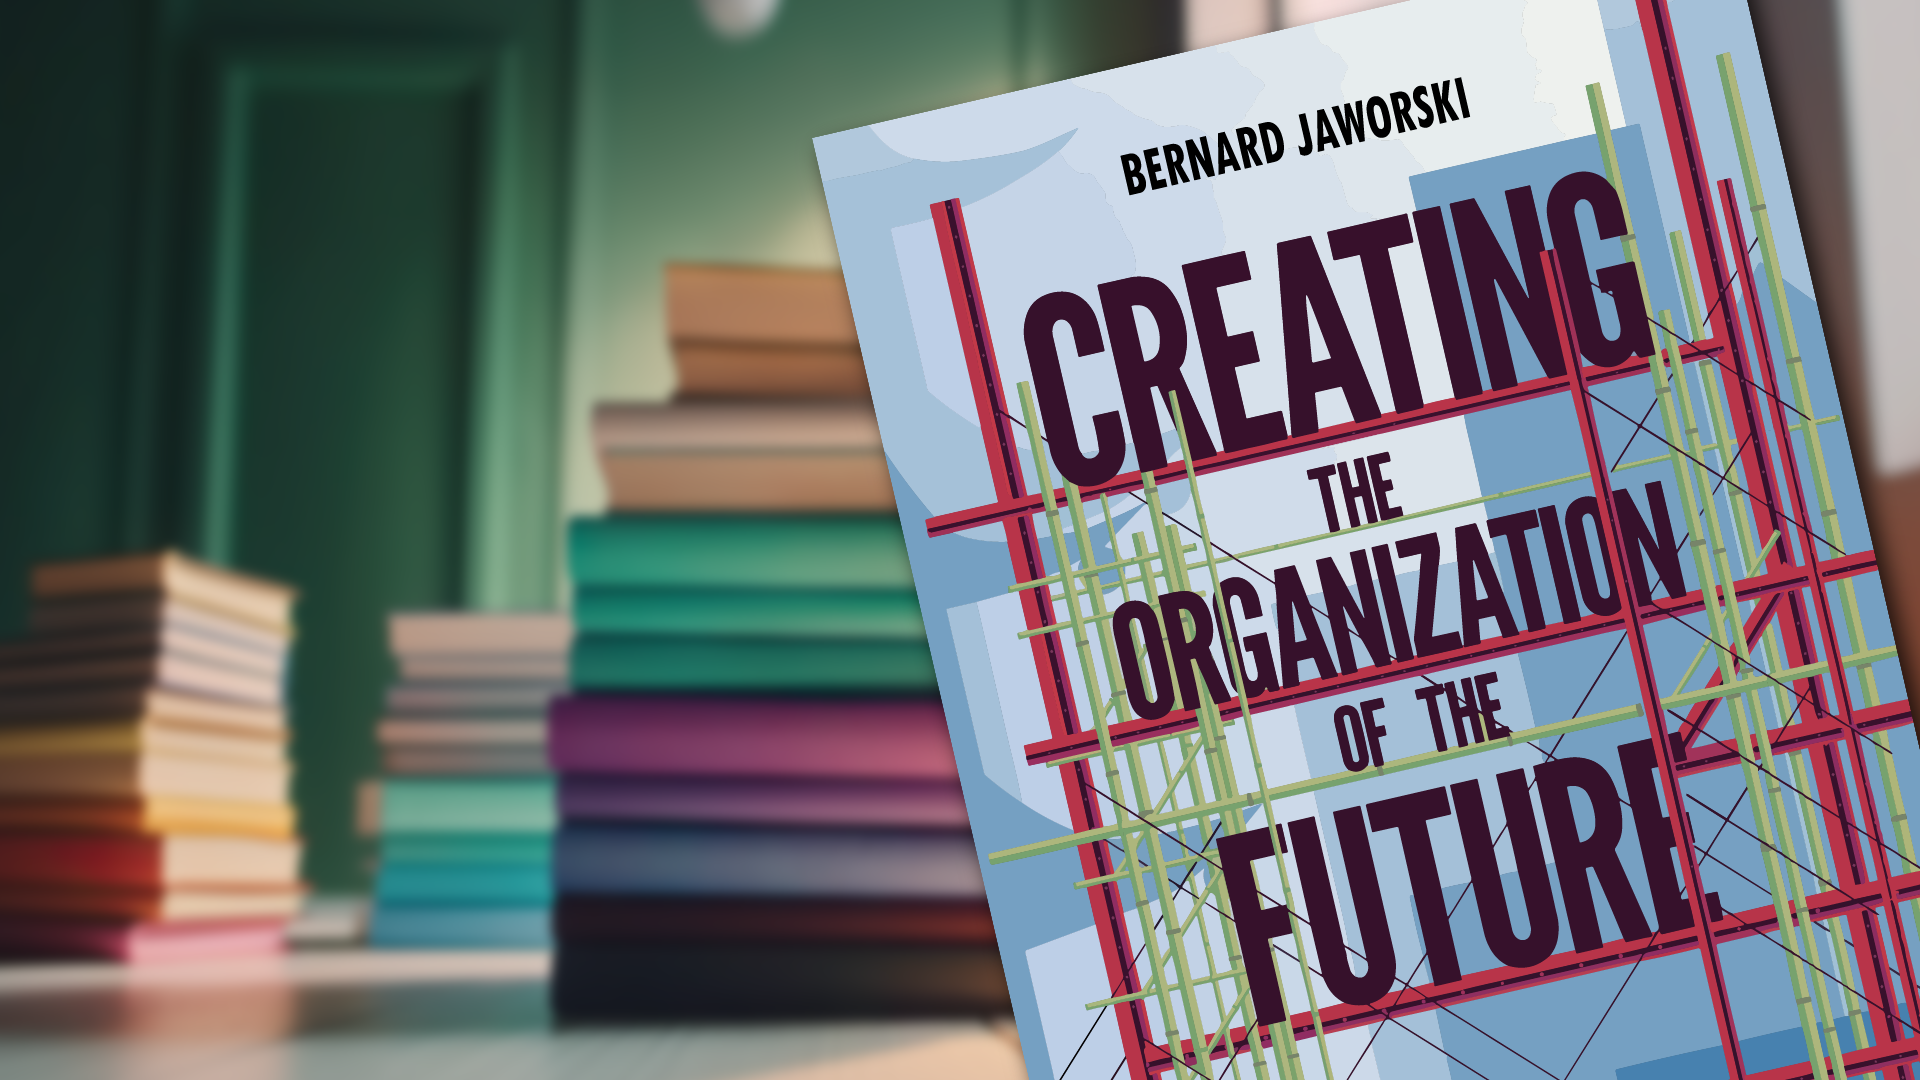 Join the Discussion of Creating the Organization of the Future